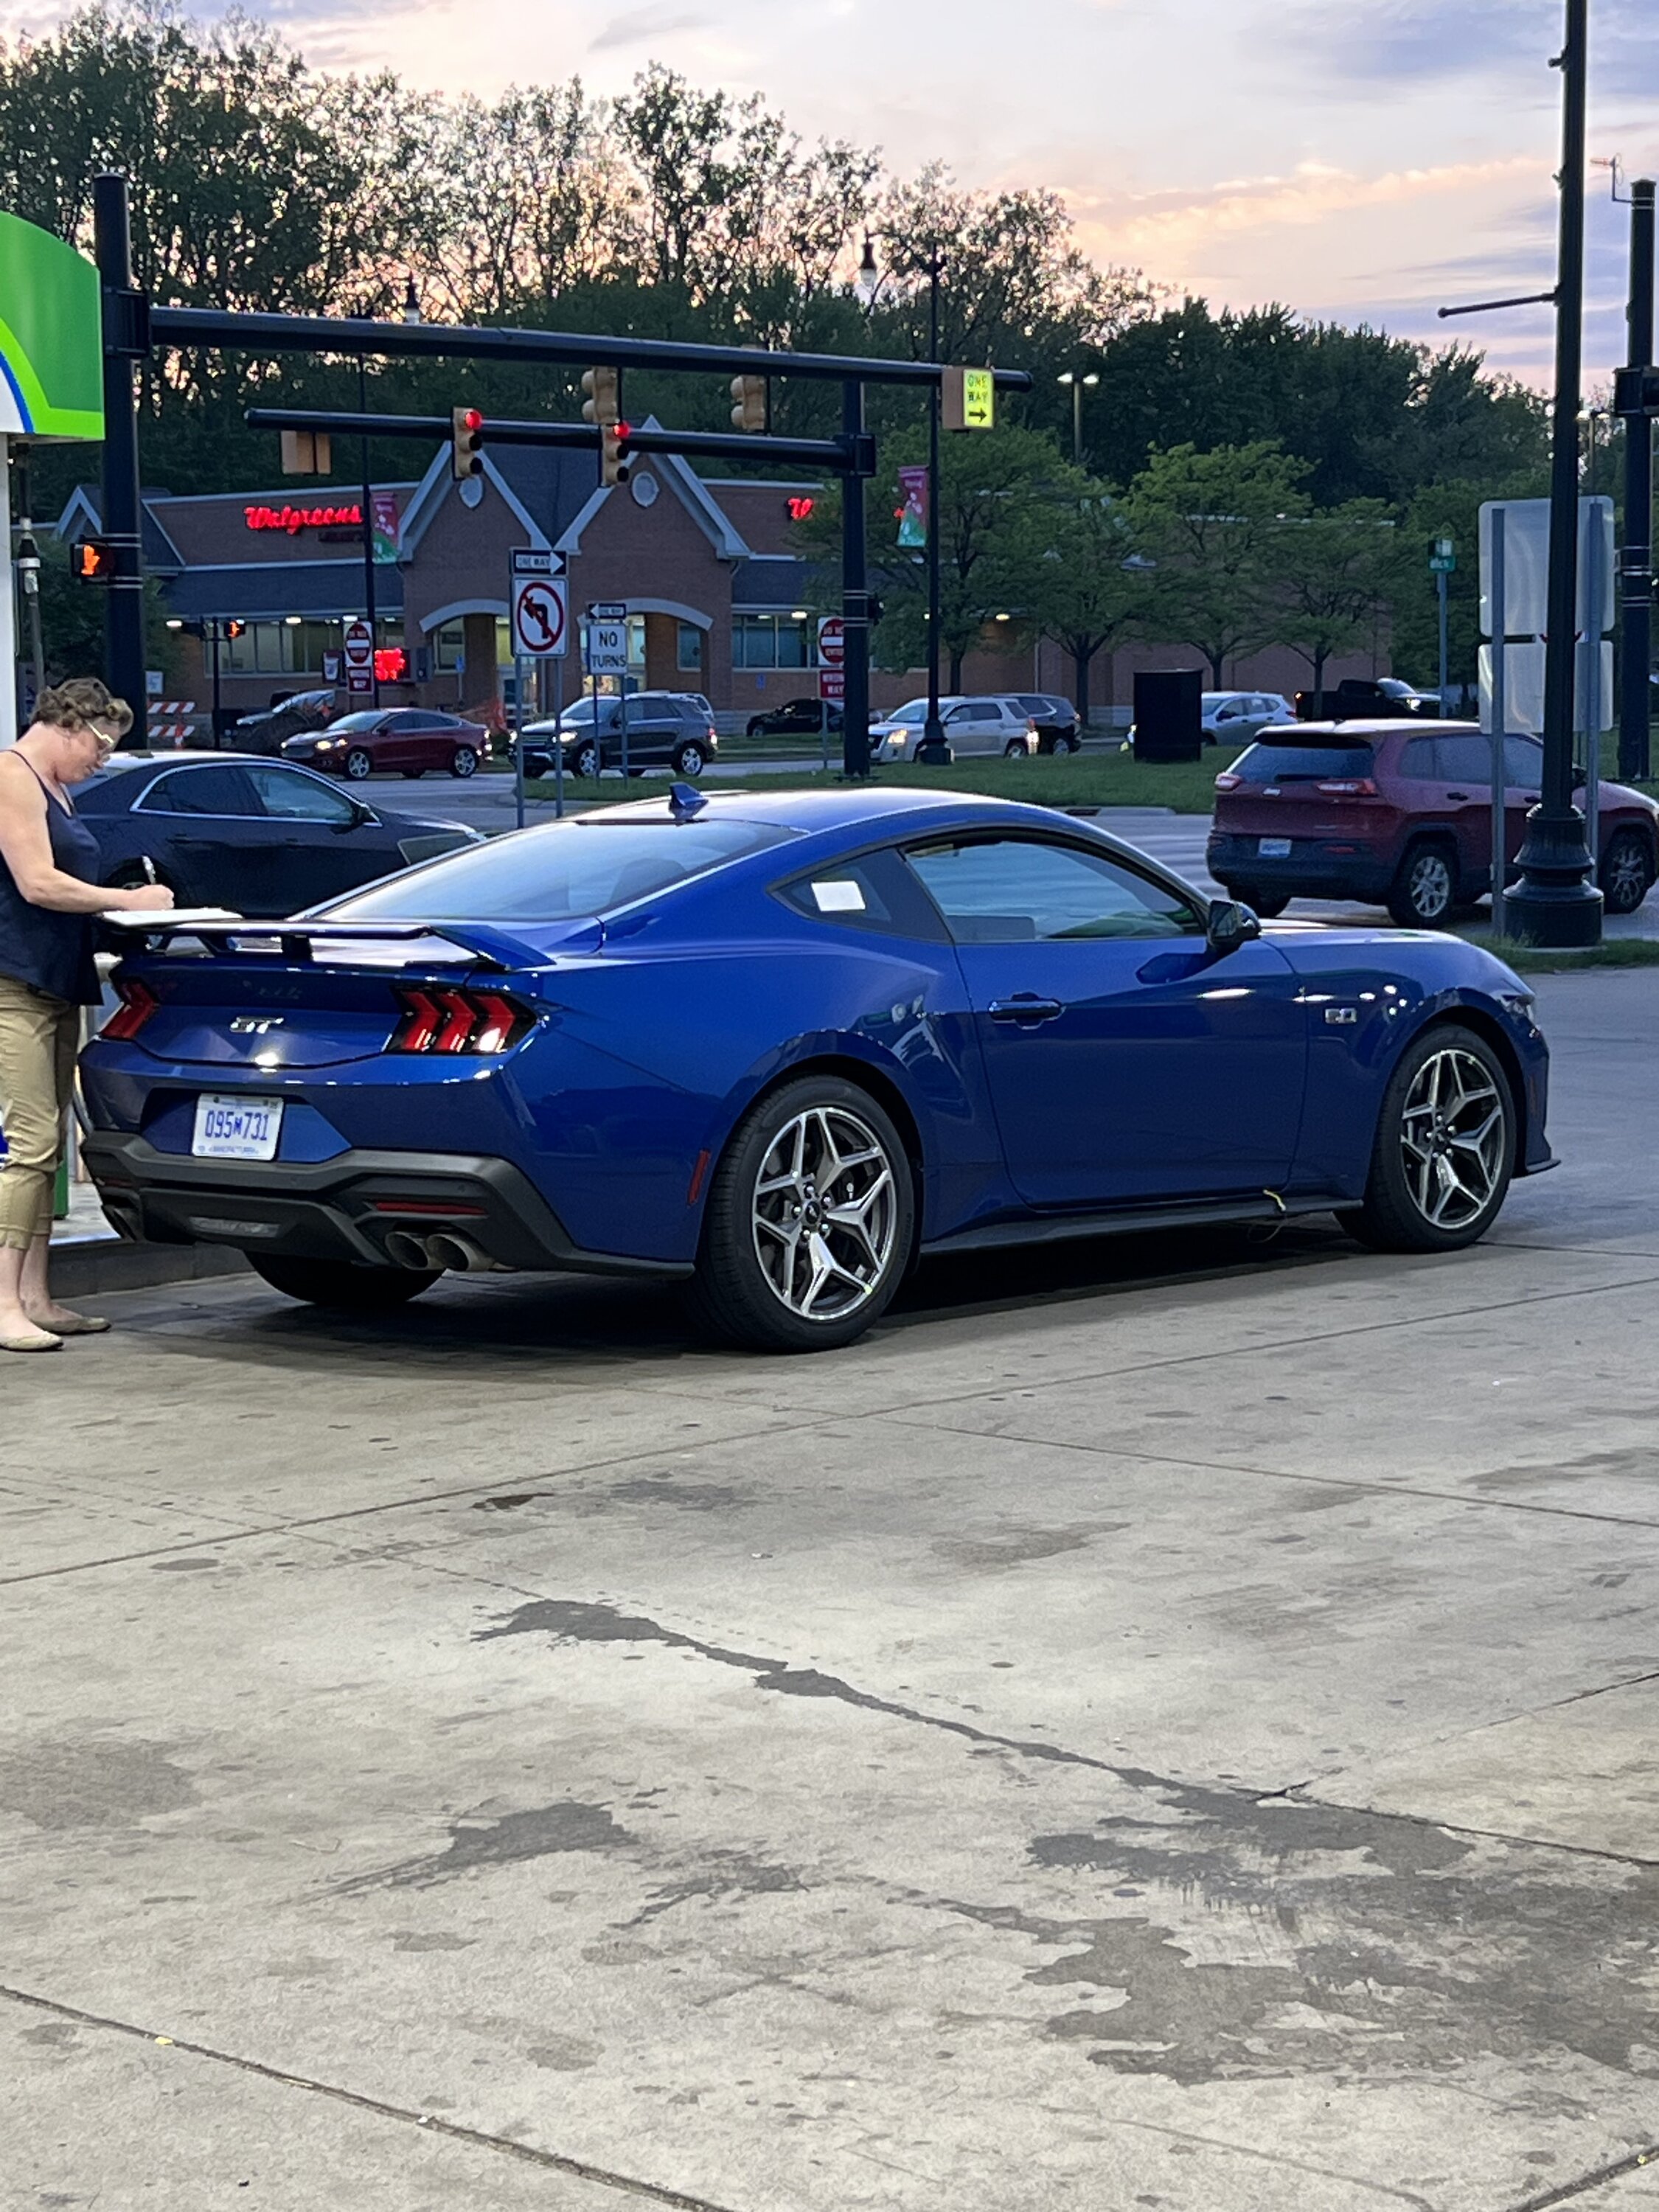 S650 Mustang New Ford Mustang picture video spotted thread! IMG_0960